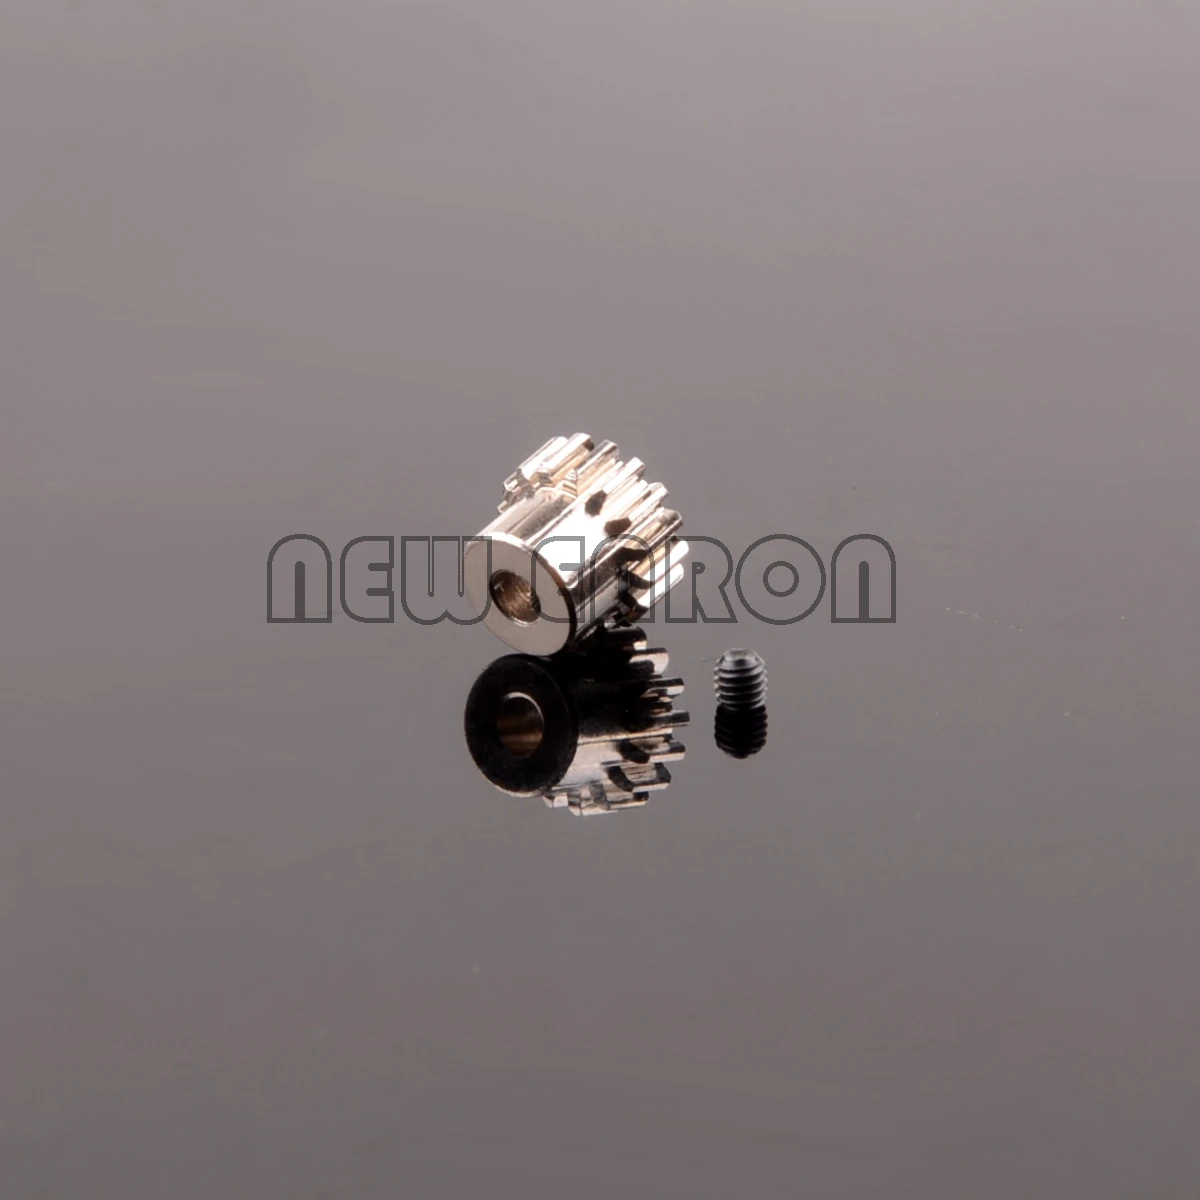 

NEW ENRON Metal Motor Gear 16T\20T 18216 18220 Fit RC HSP 1/16 Off-Road Buggy Truck